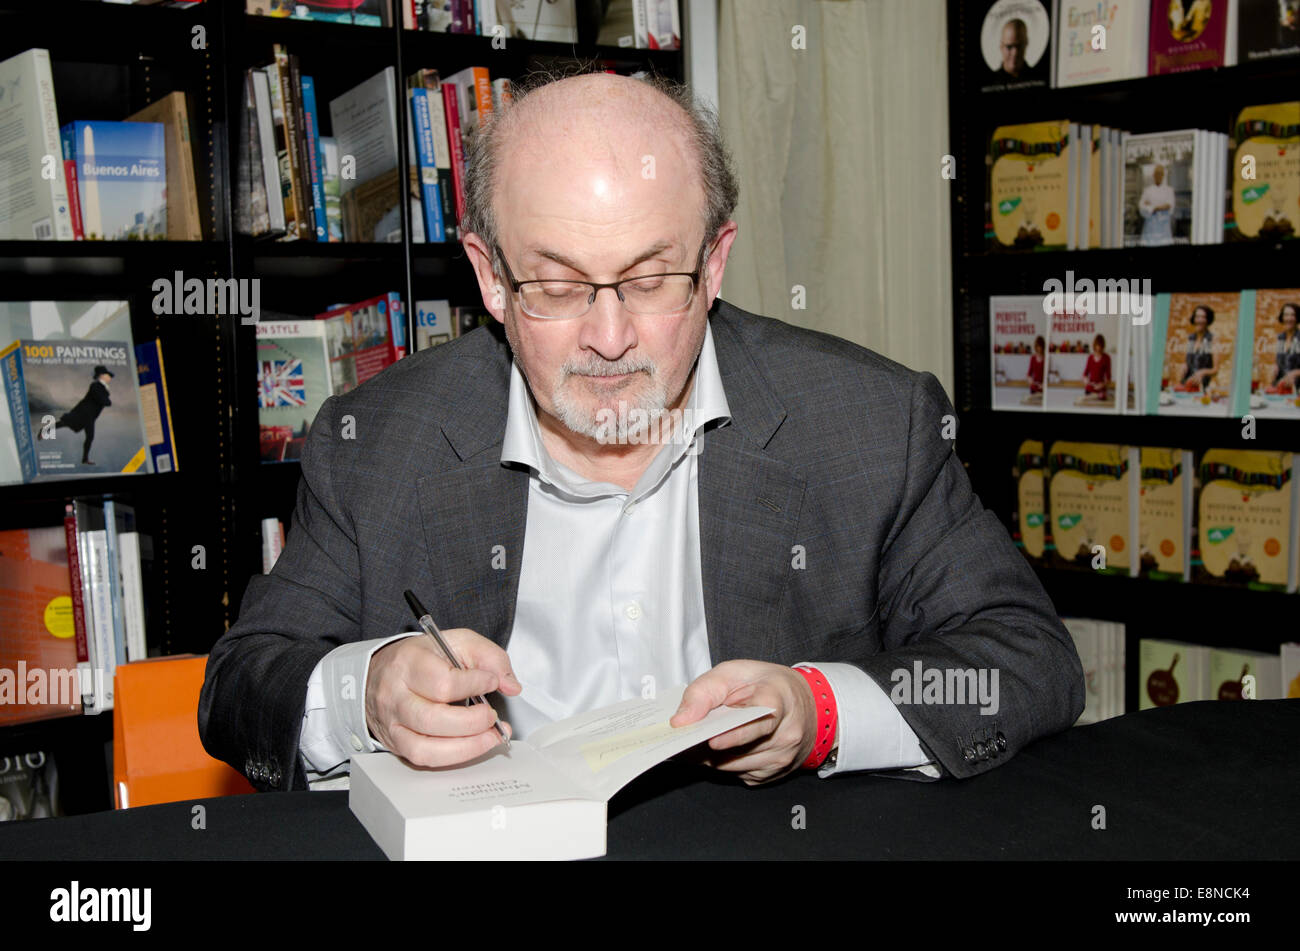 Salman  Rushdie, novelist,  Man Booker Prize winner and writer of Midnight's Children and The Satanic Verses signs books at the Cheltenham Literary Festival 10th October 2014 Gloucestershire Uk Credit:  Prixnews/Alamy Live News Stock Photo